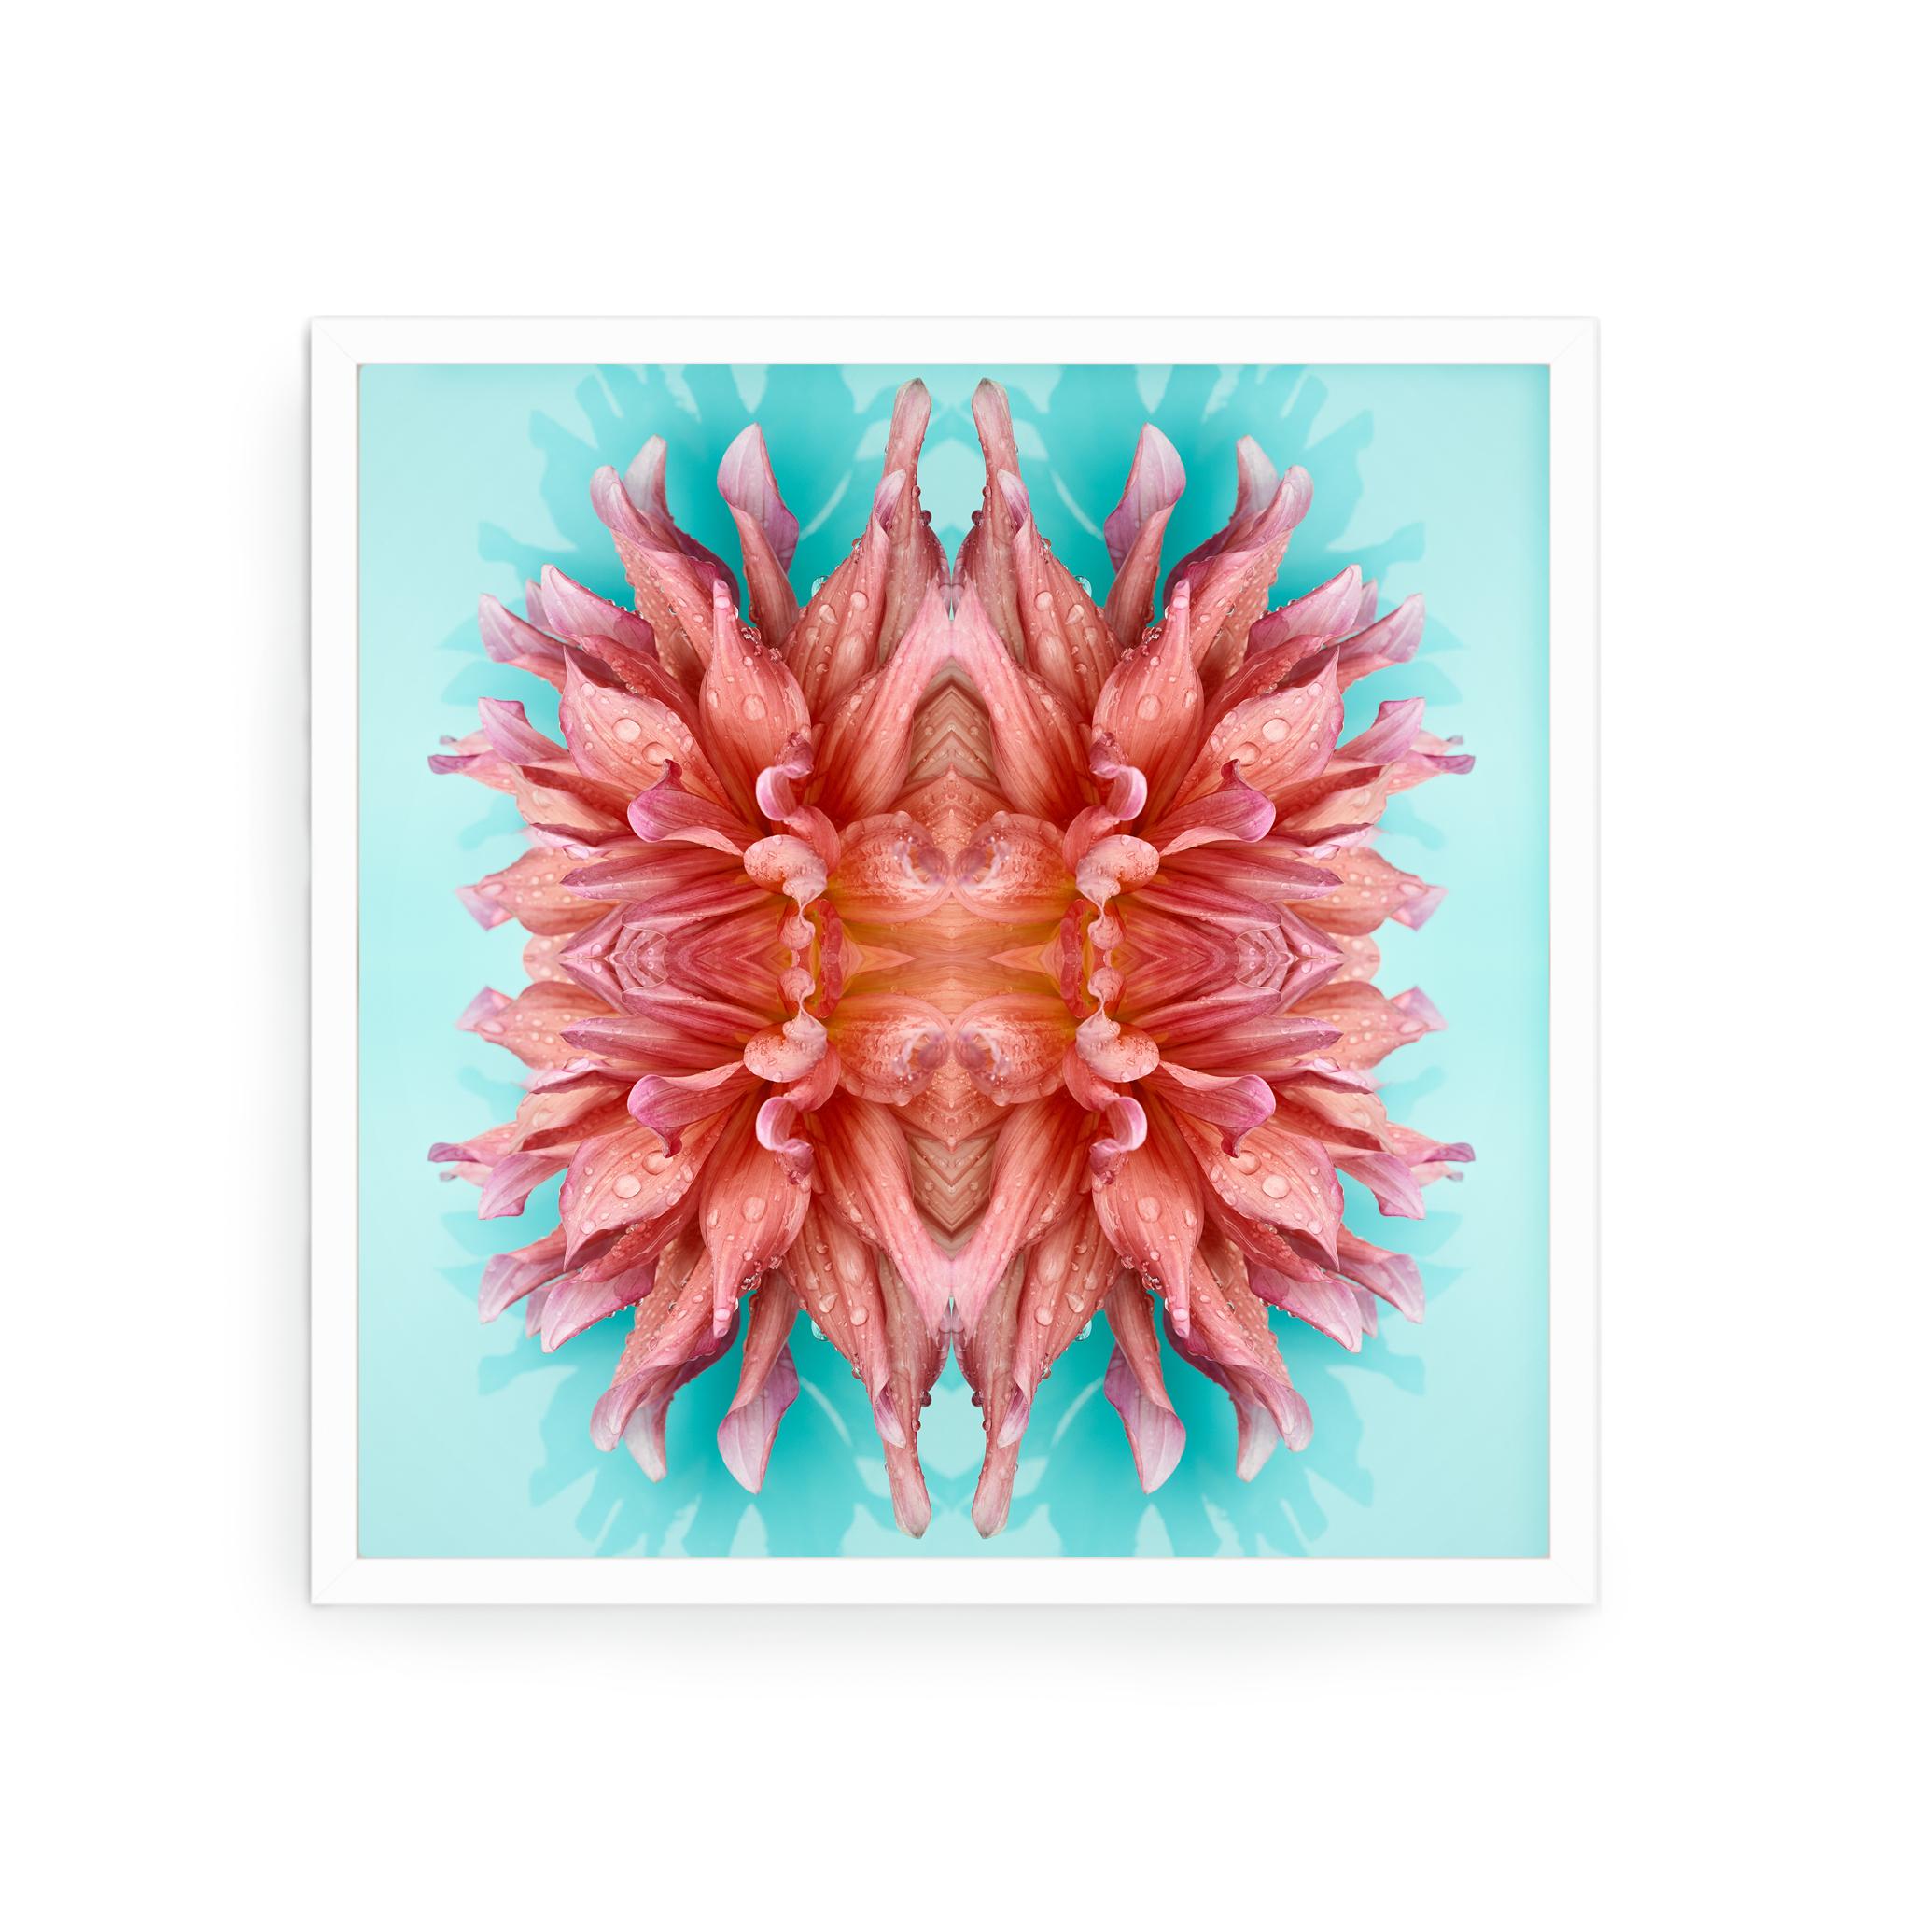 This print features the playful relationship between natural forms and botanicals. In this image Erin uses the natural composition of the pink dahlia, and her own collage work, to create a hypnotic mandala with the floral. Some describe it as a